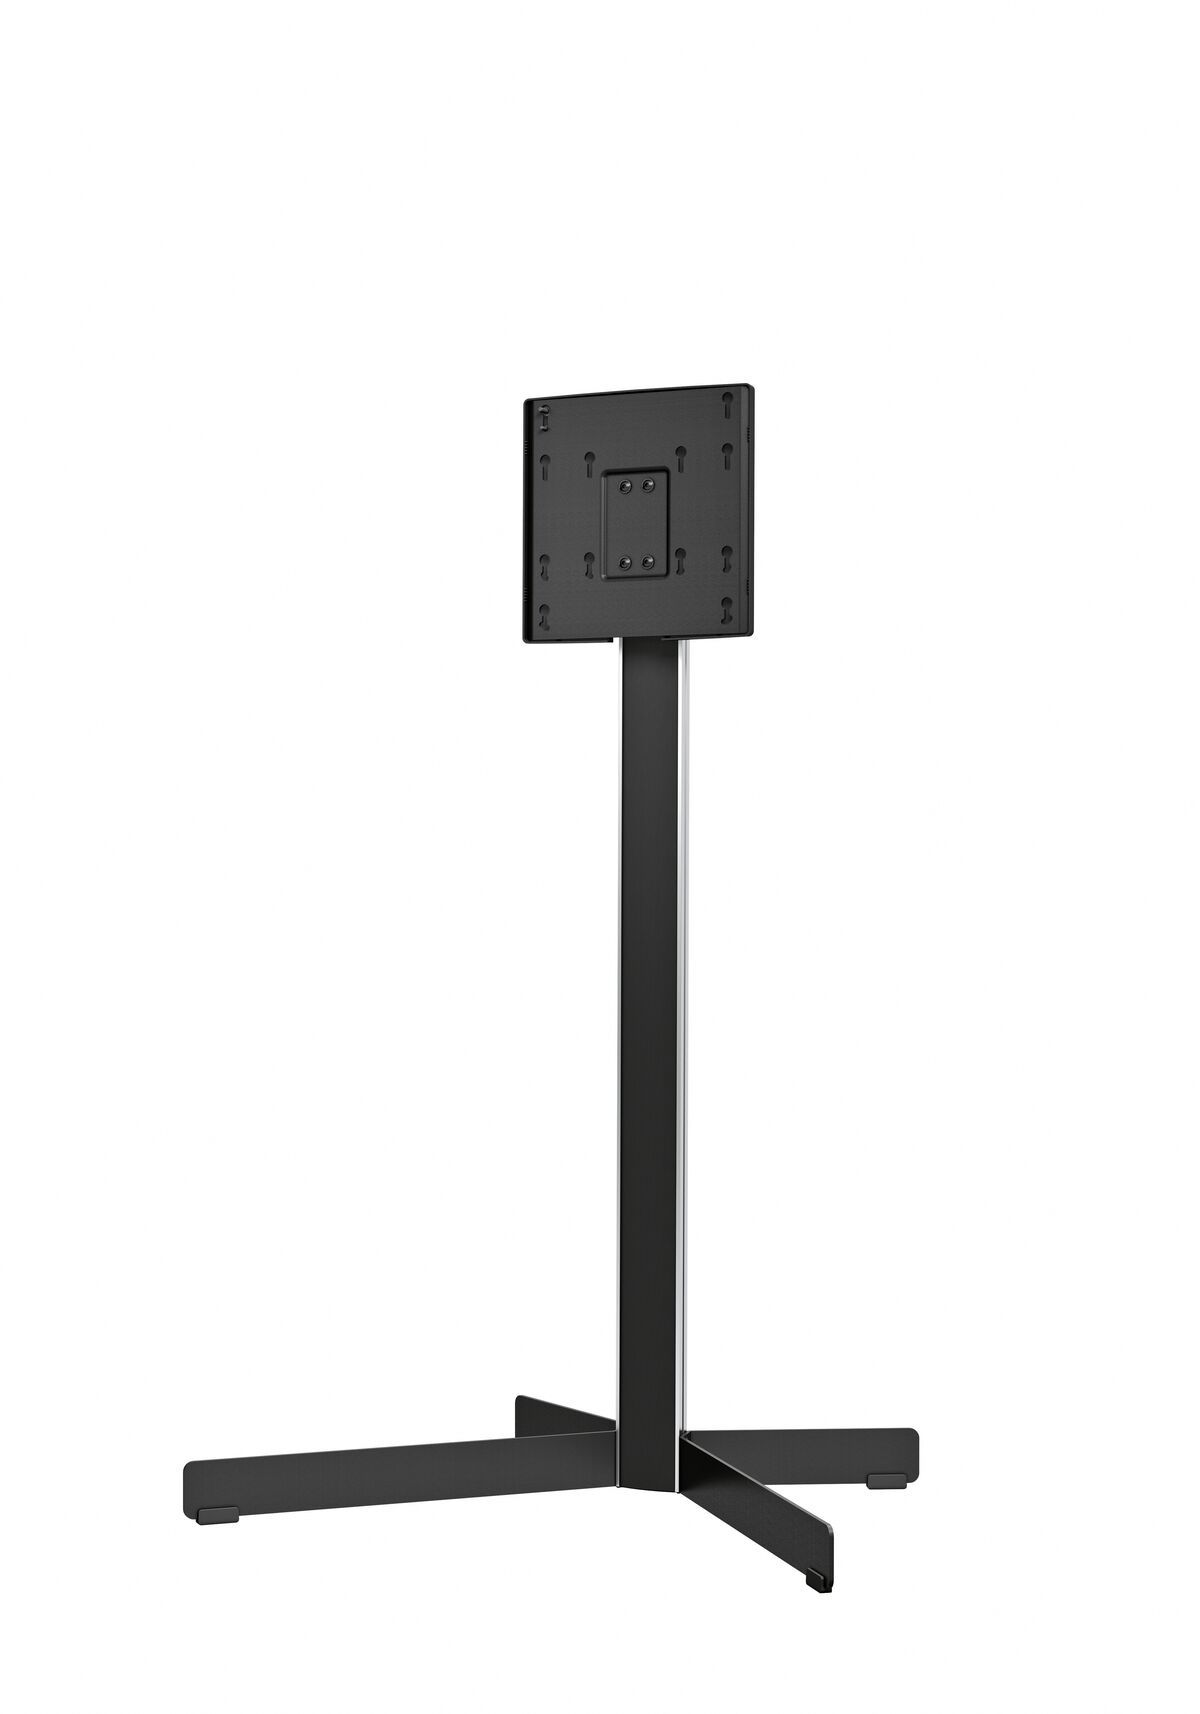 Vogel's EFF 8230 TV Floor Stand - Suitable for 19 up to 40 inch TVs up to 30 kg - Product